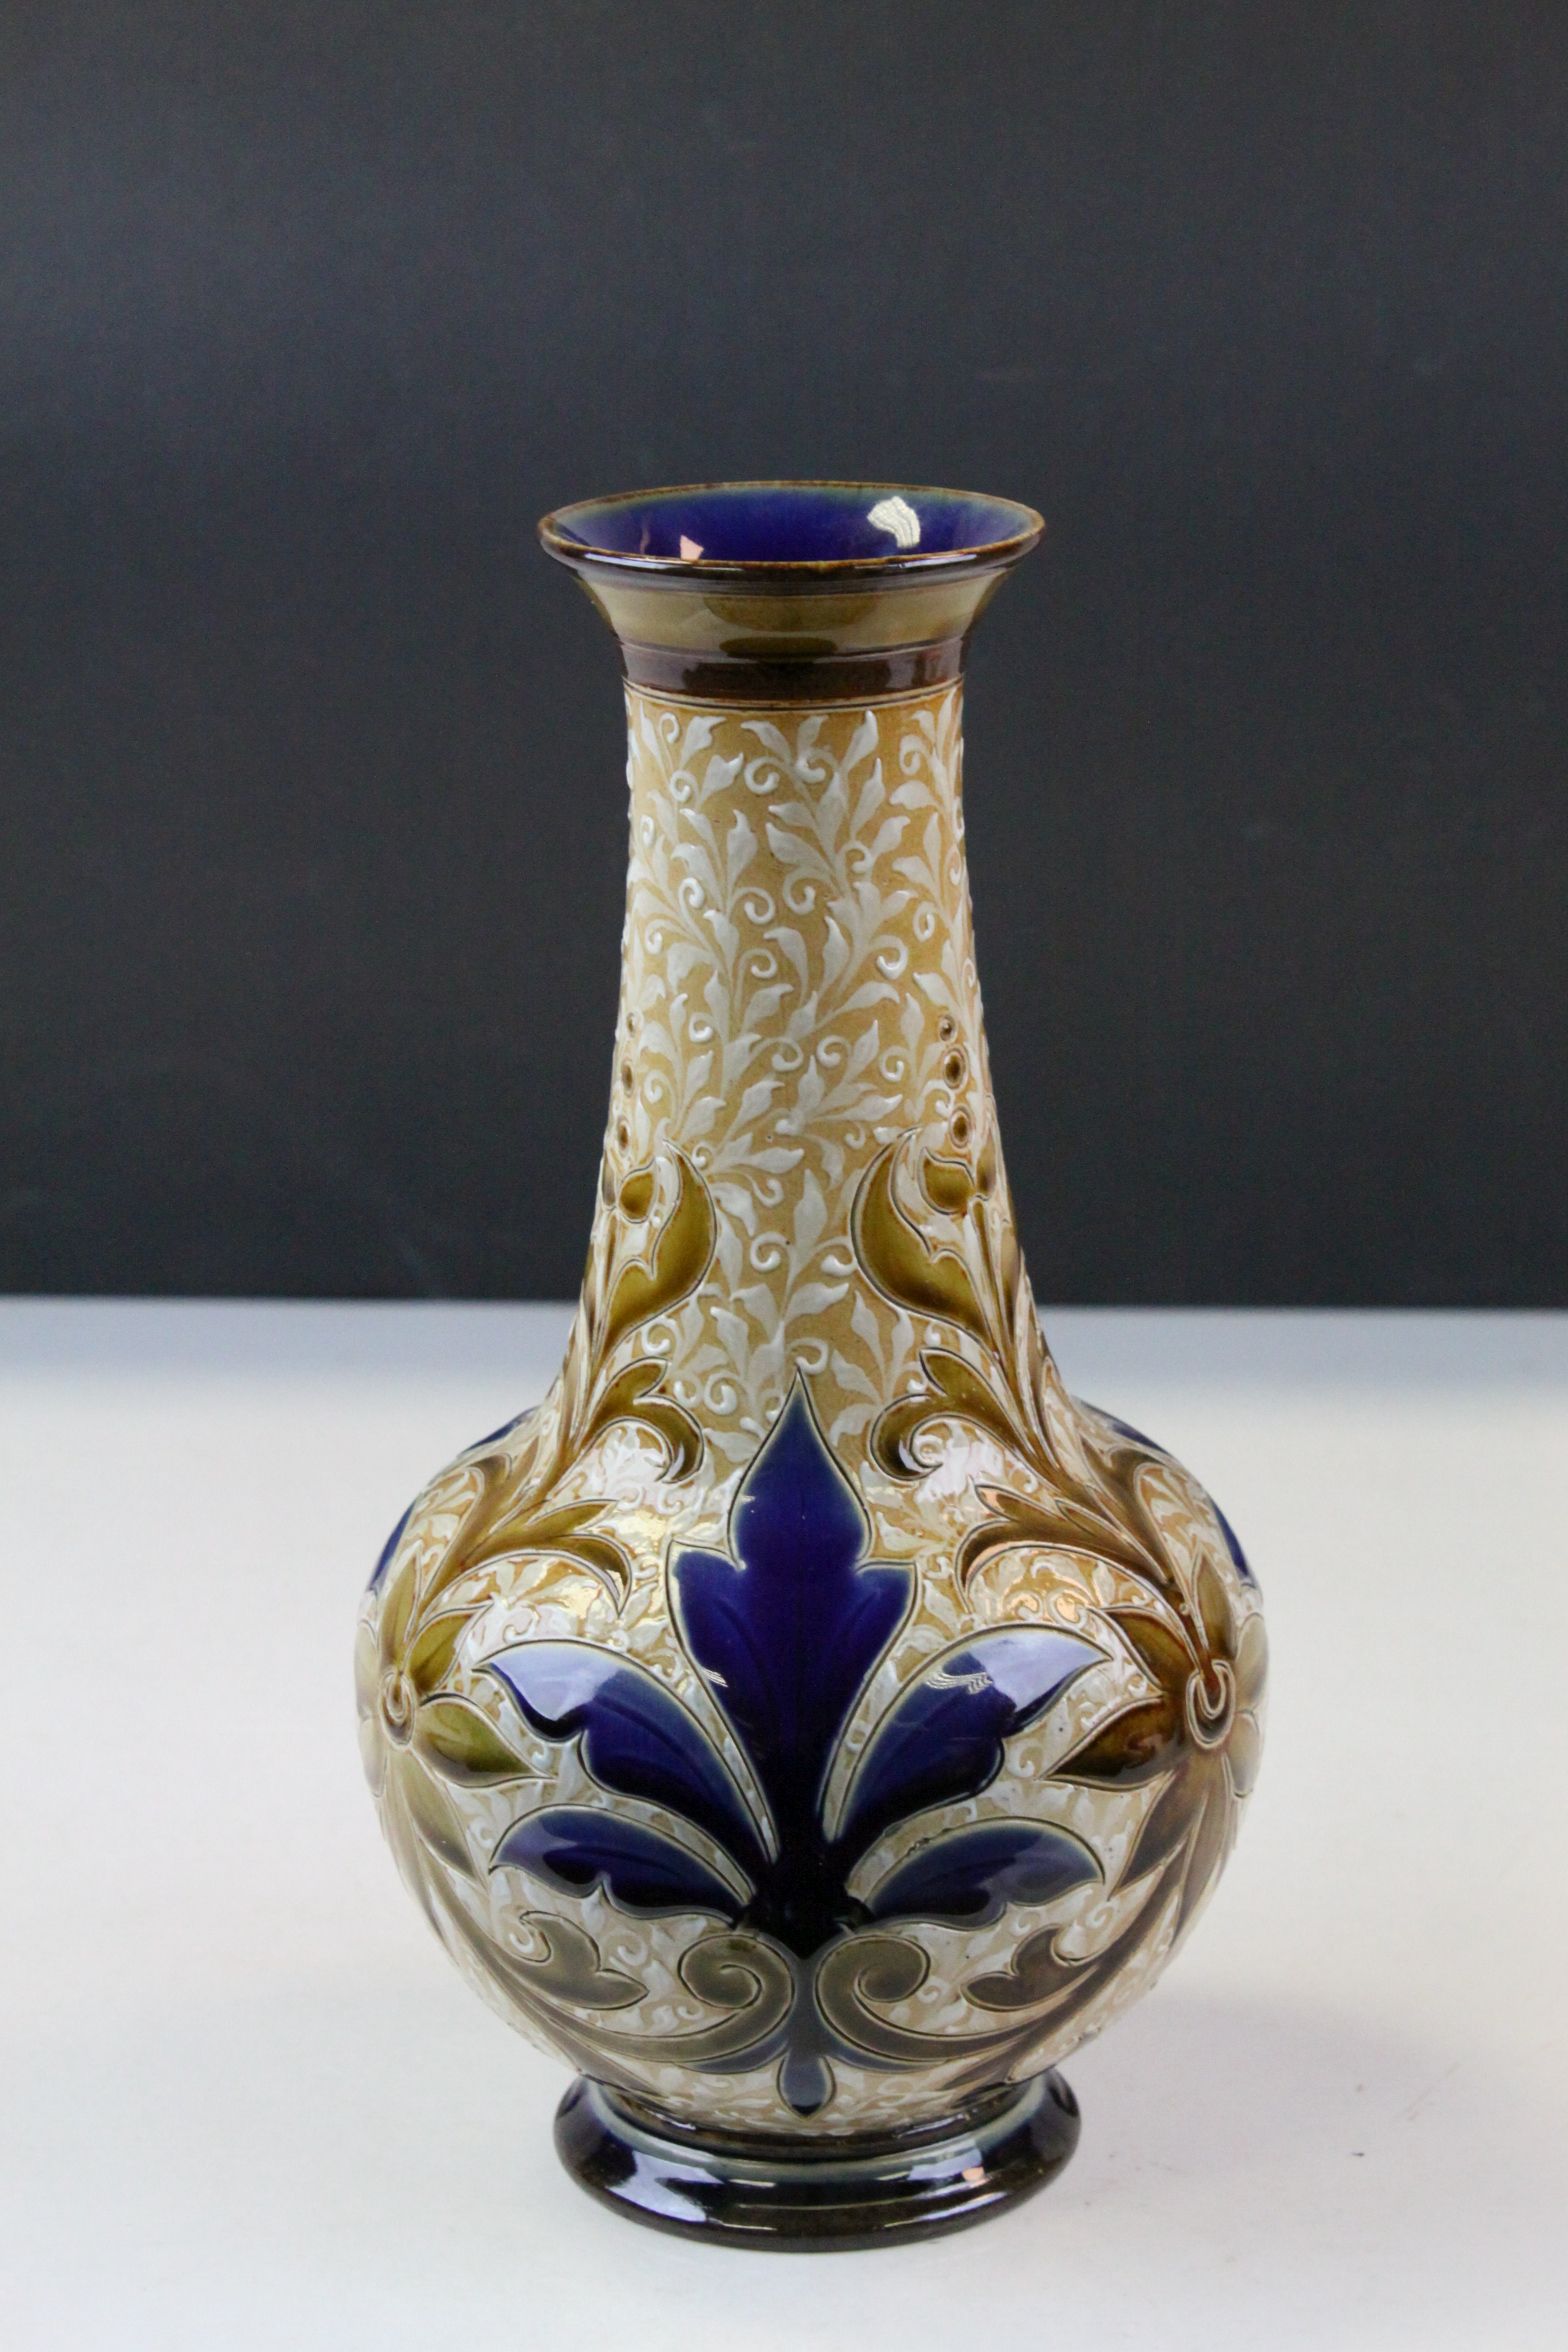 Doulton Lambeth late 19th century vase profusely decorated with leaf and flower decoration, - Image 2 of 10